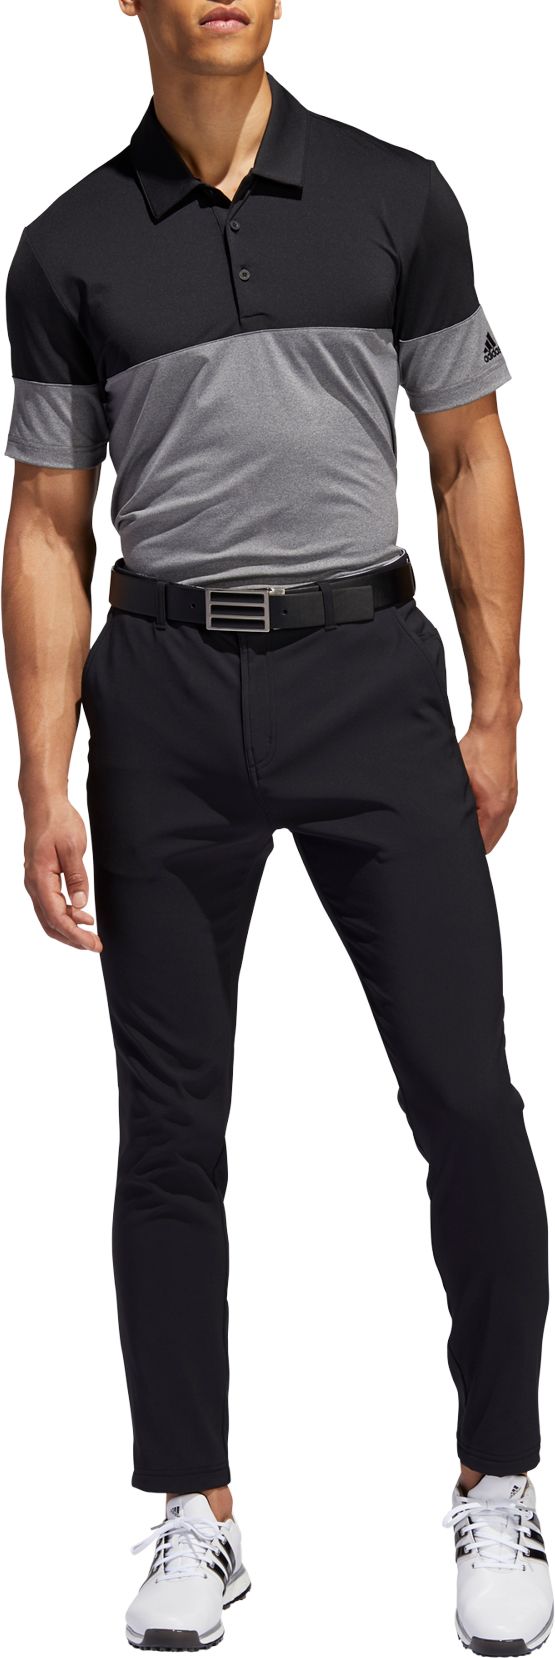 adidas fall weight golf trousers